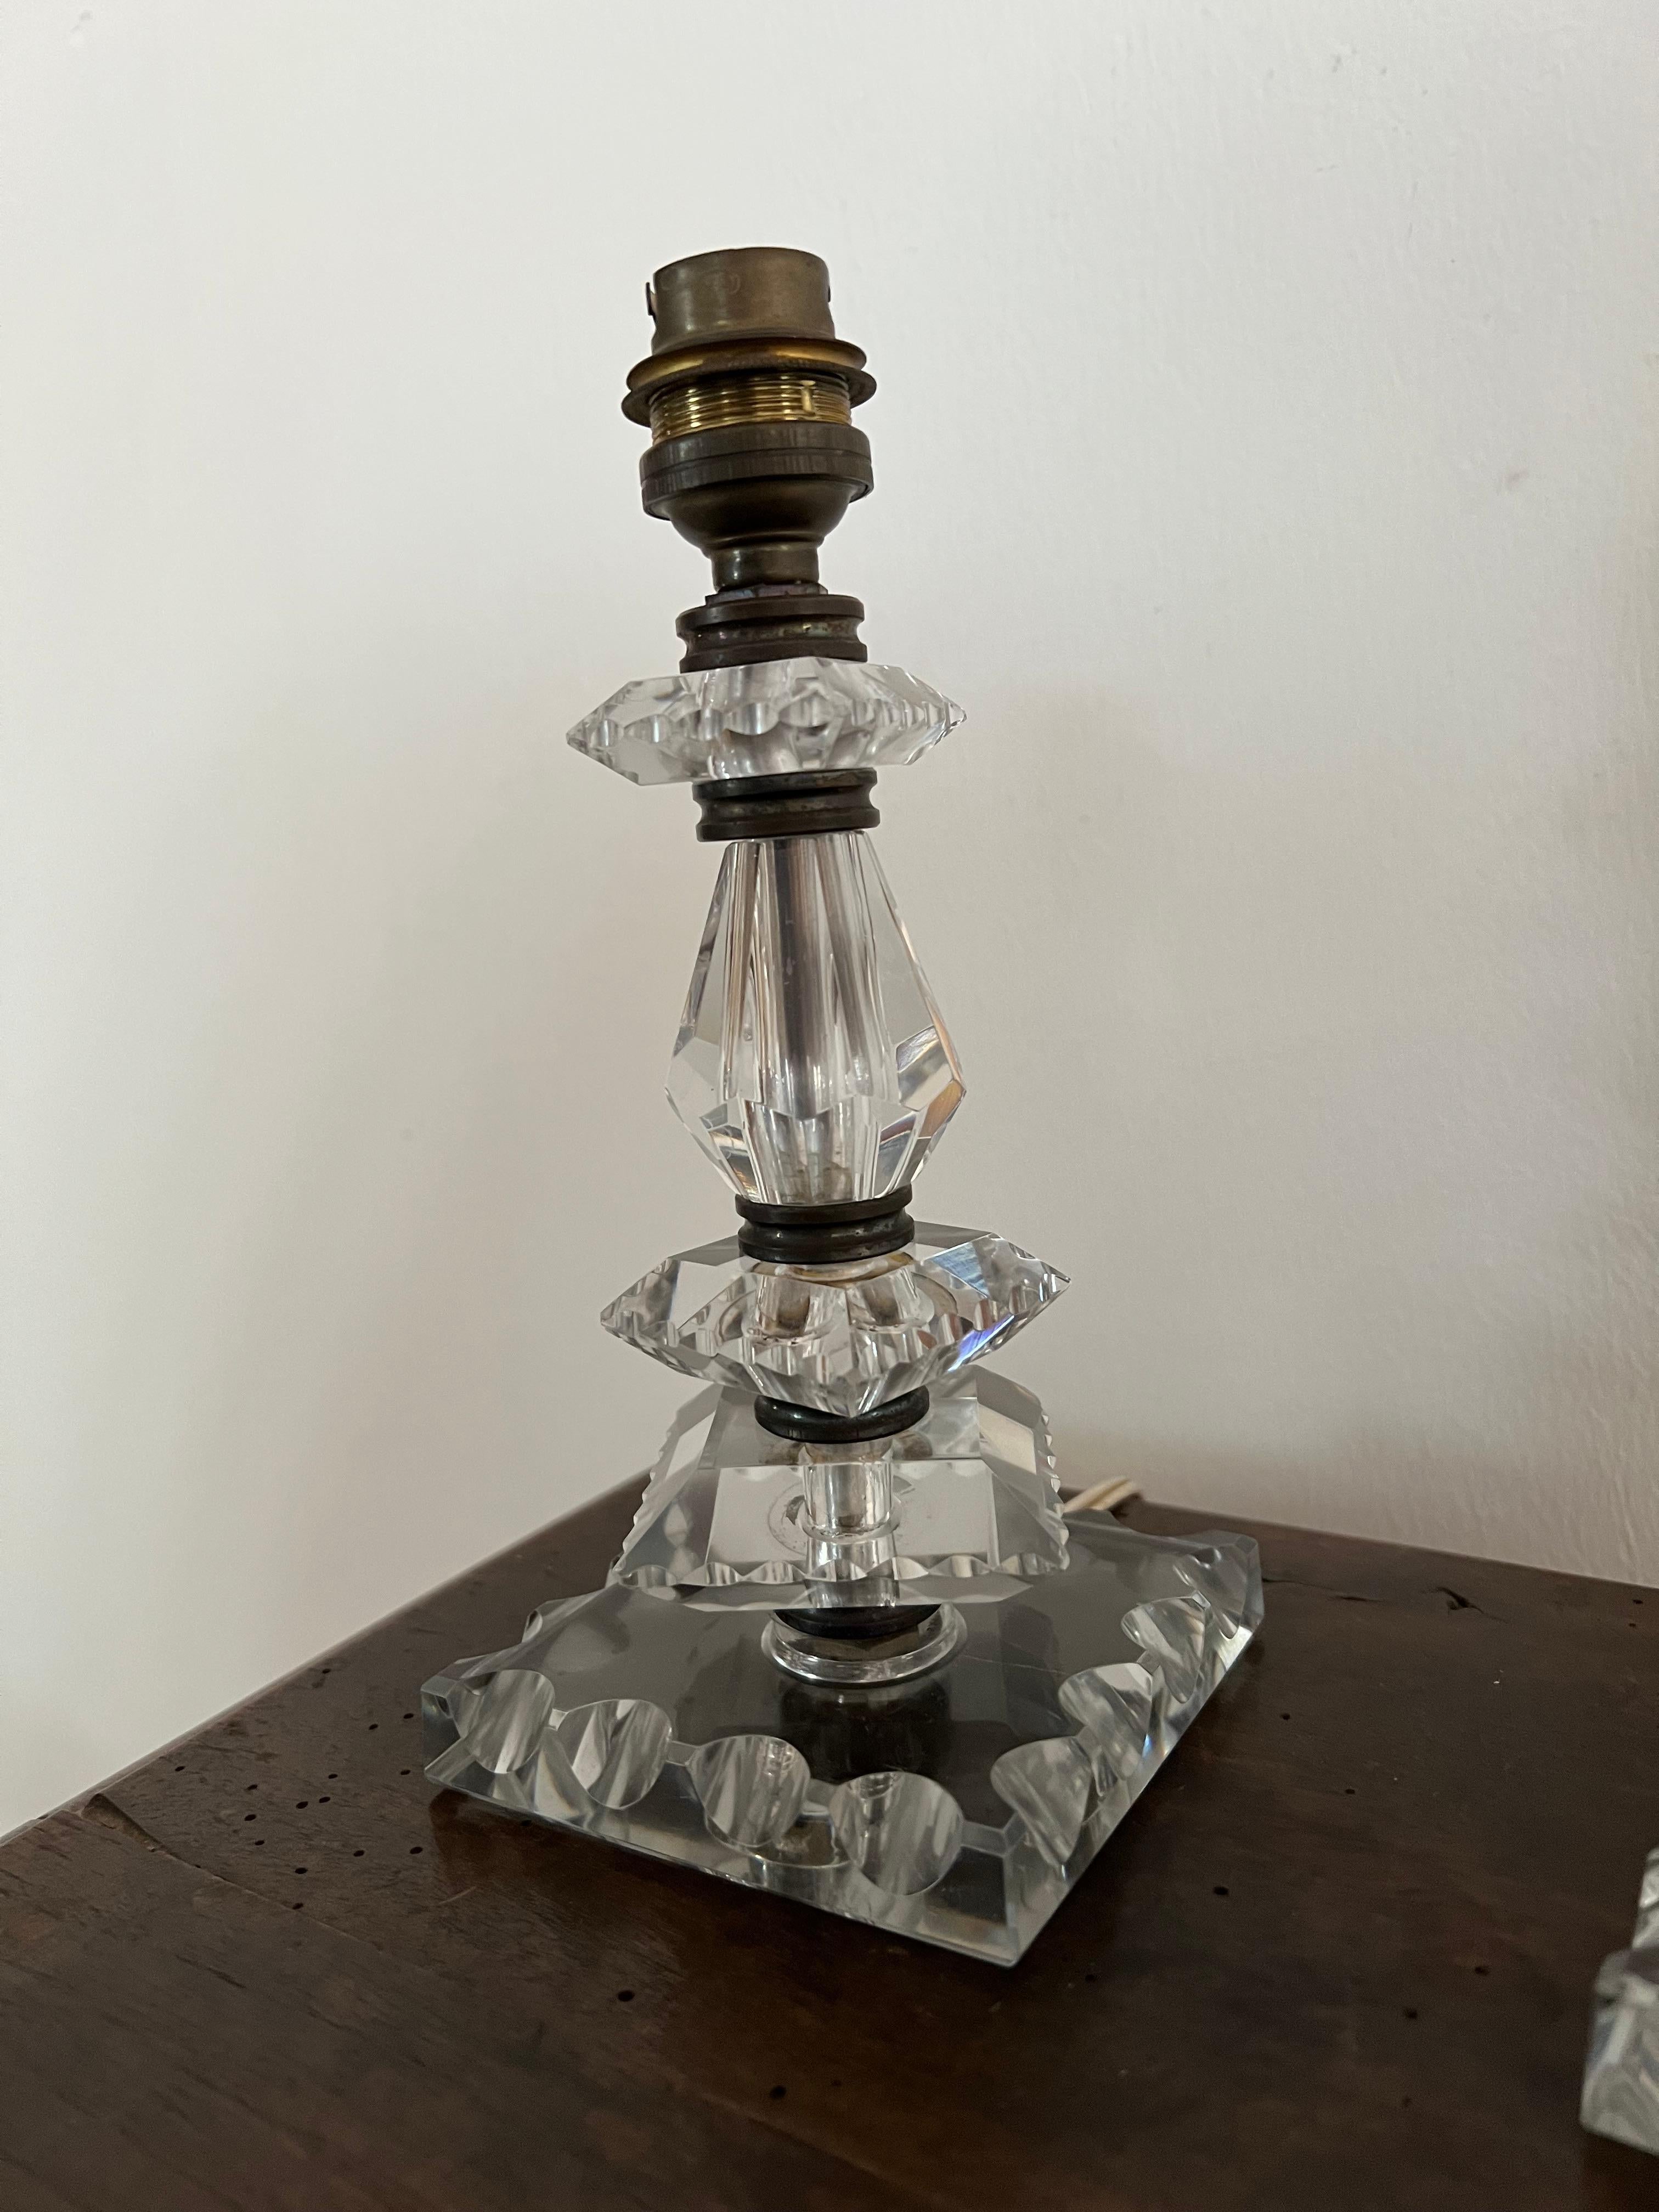 Pair of Art Deco Lamps by Baccarat, France circa 1940, Attr. to Jacques Adnet In Good Condition For Sale In Merida, Yucatan